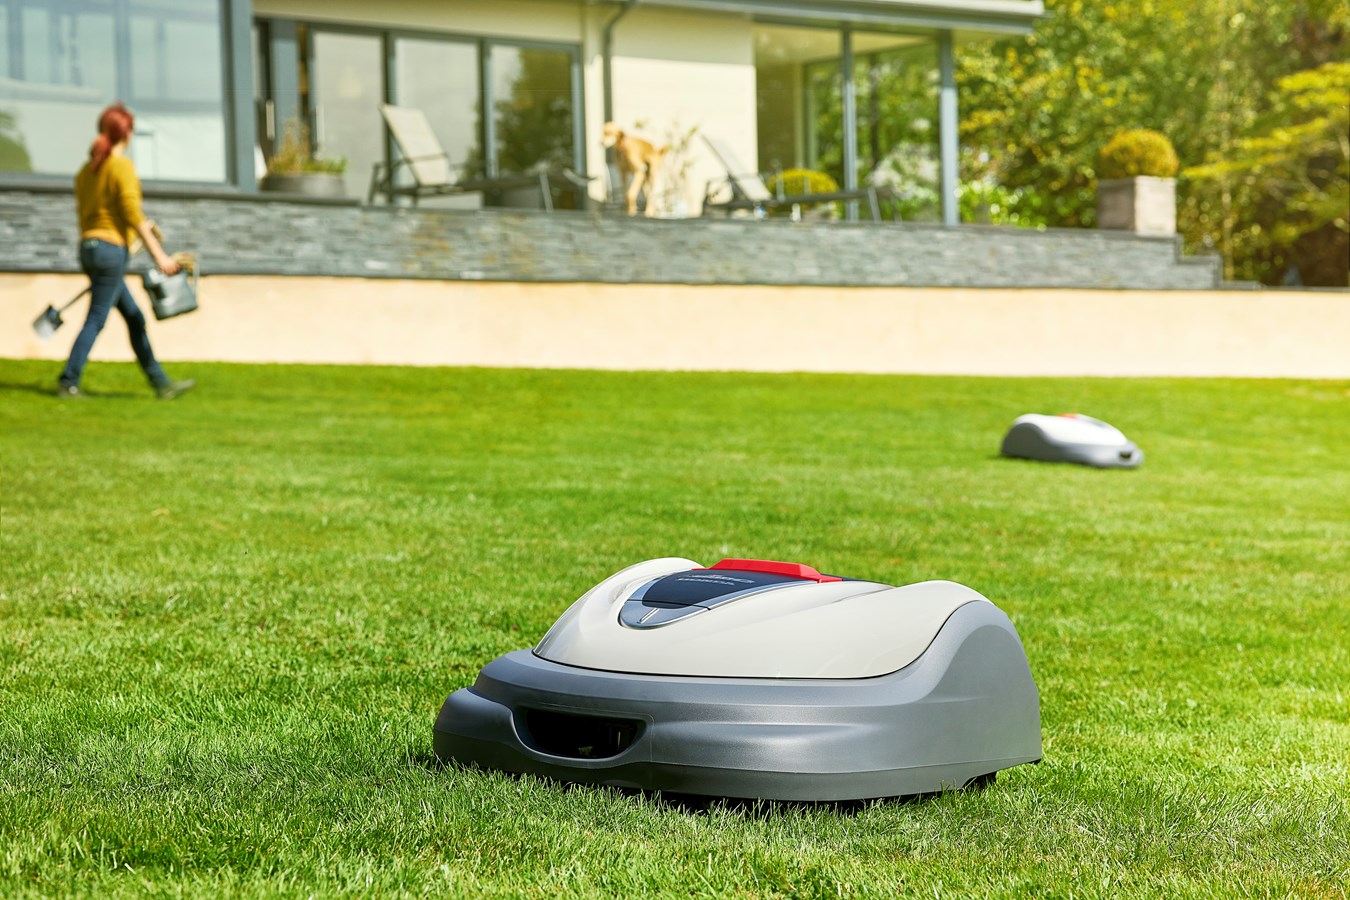 Honda has announced a new, fully connected Live version of its HRM3000 robotic mower